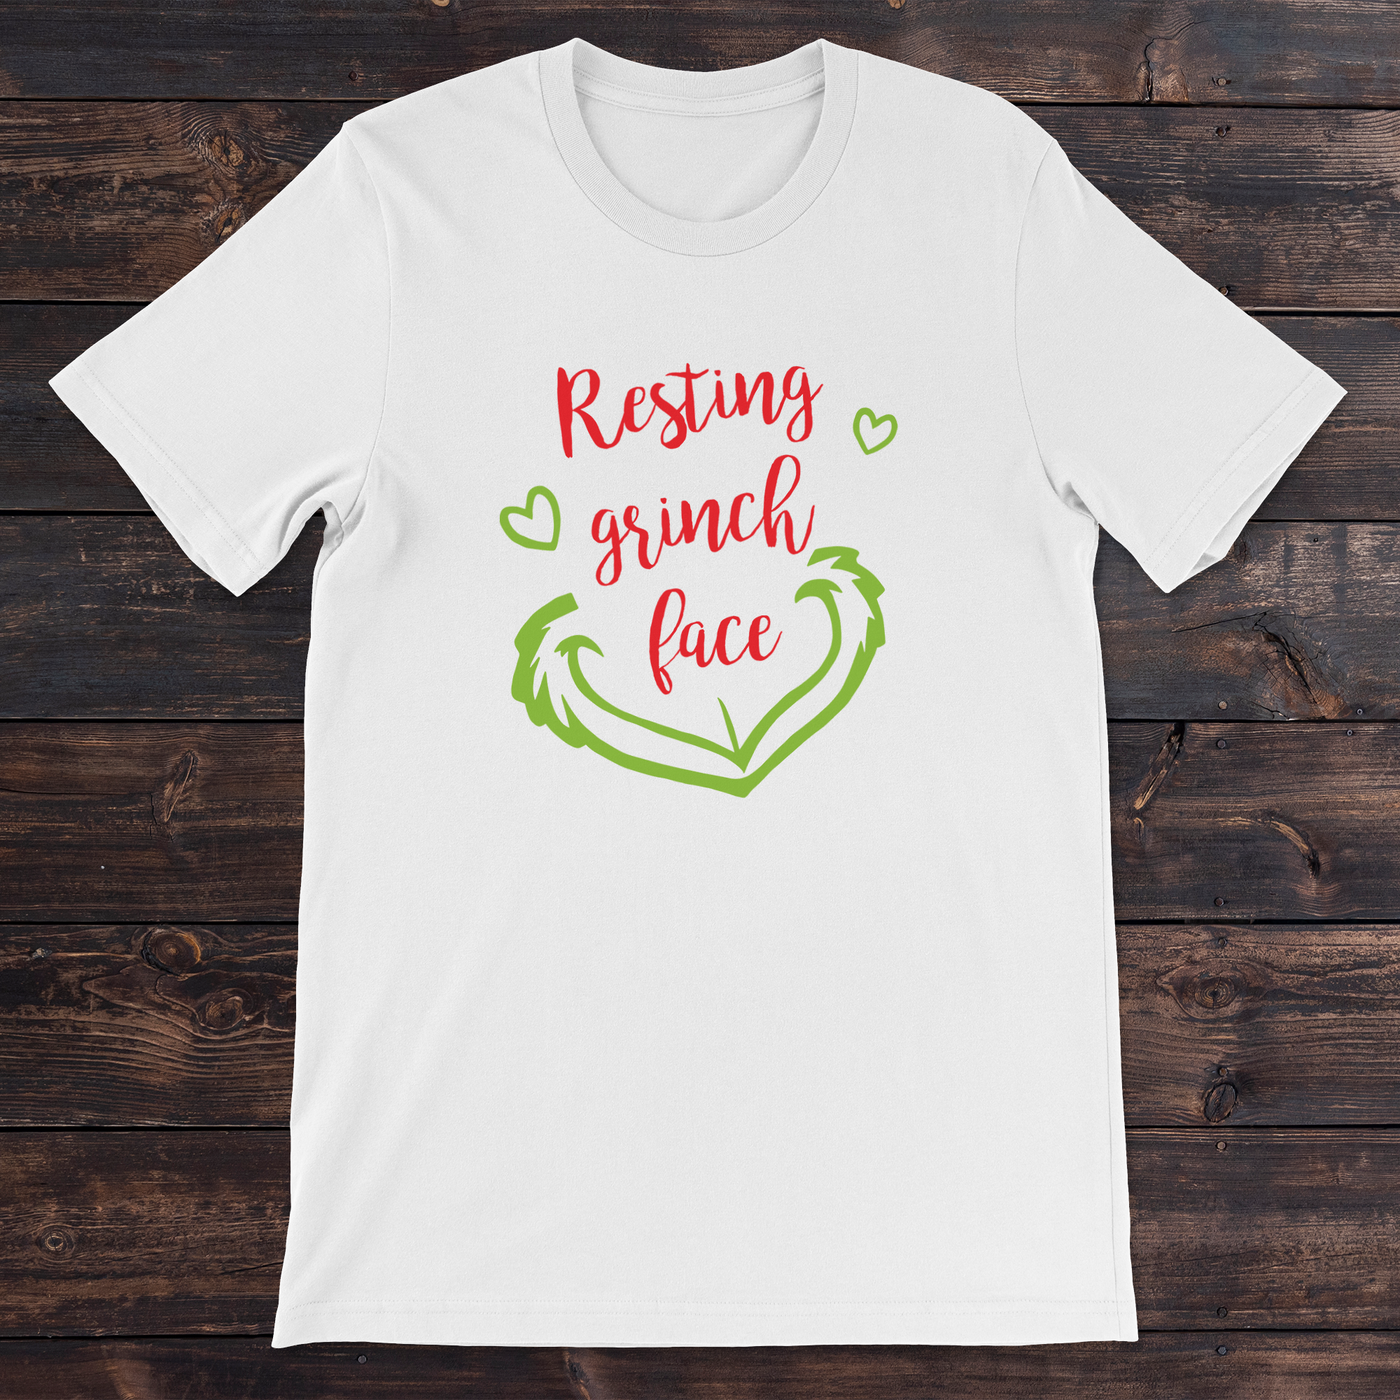 Daydream Tees Resting Grinch Face White